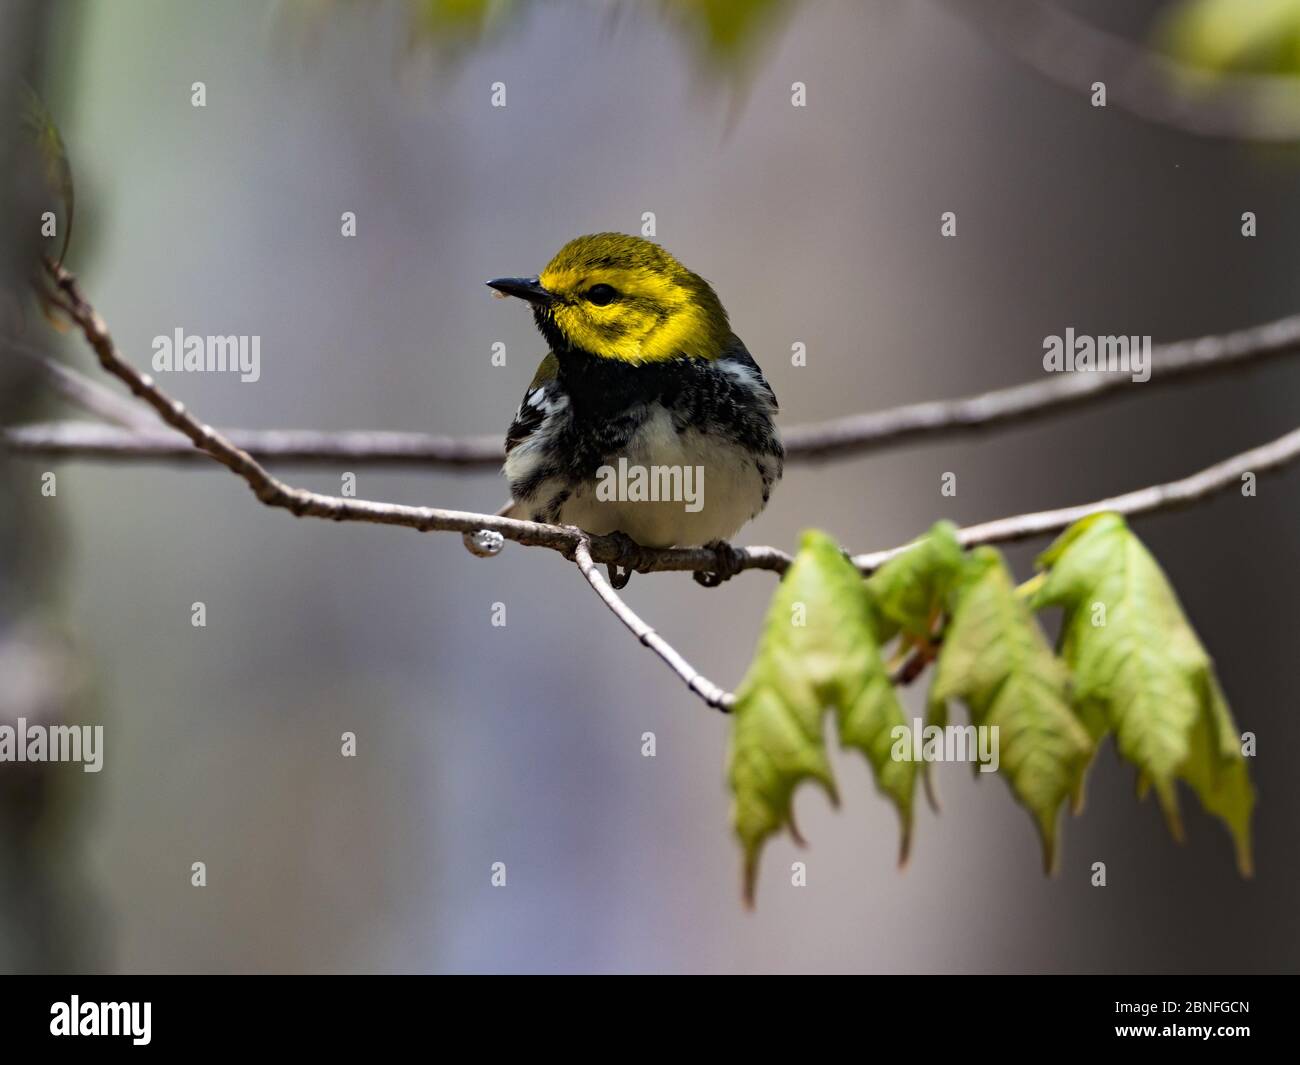 Black-throated green warbler, Setophaga virens, a neotropical migrant at the Wilderness Center, Ohio Stock Photo